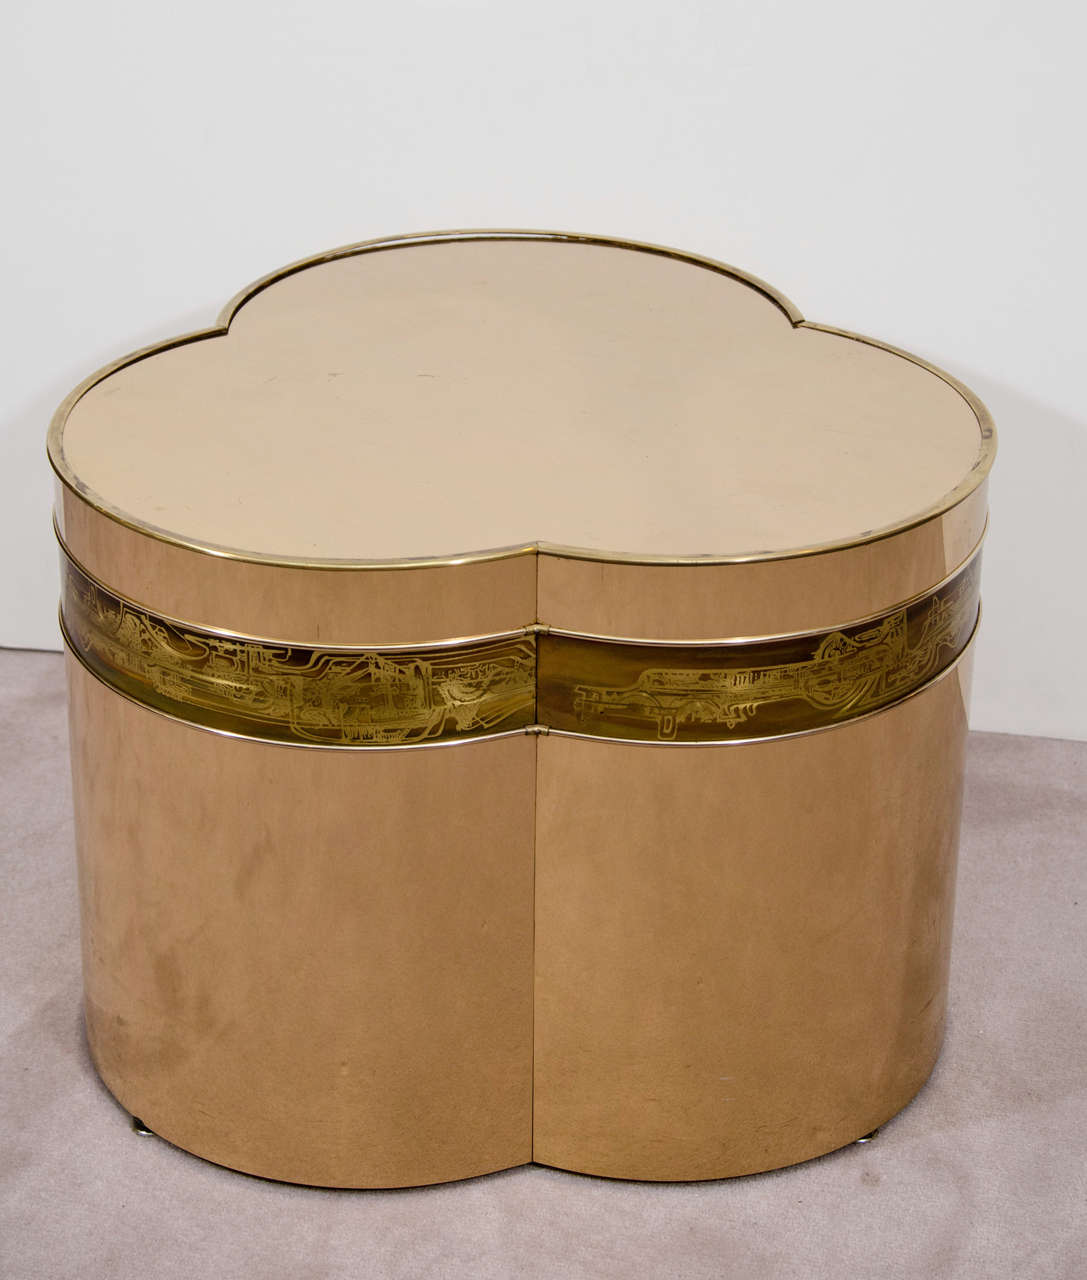 A pair of vintage trifoil-form side tables in brass by Bernard Rohne for Mastercraft.